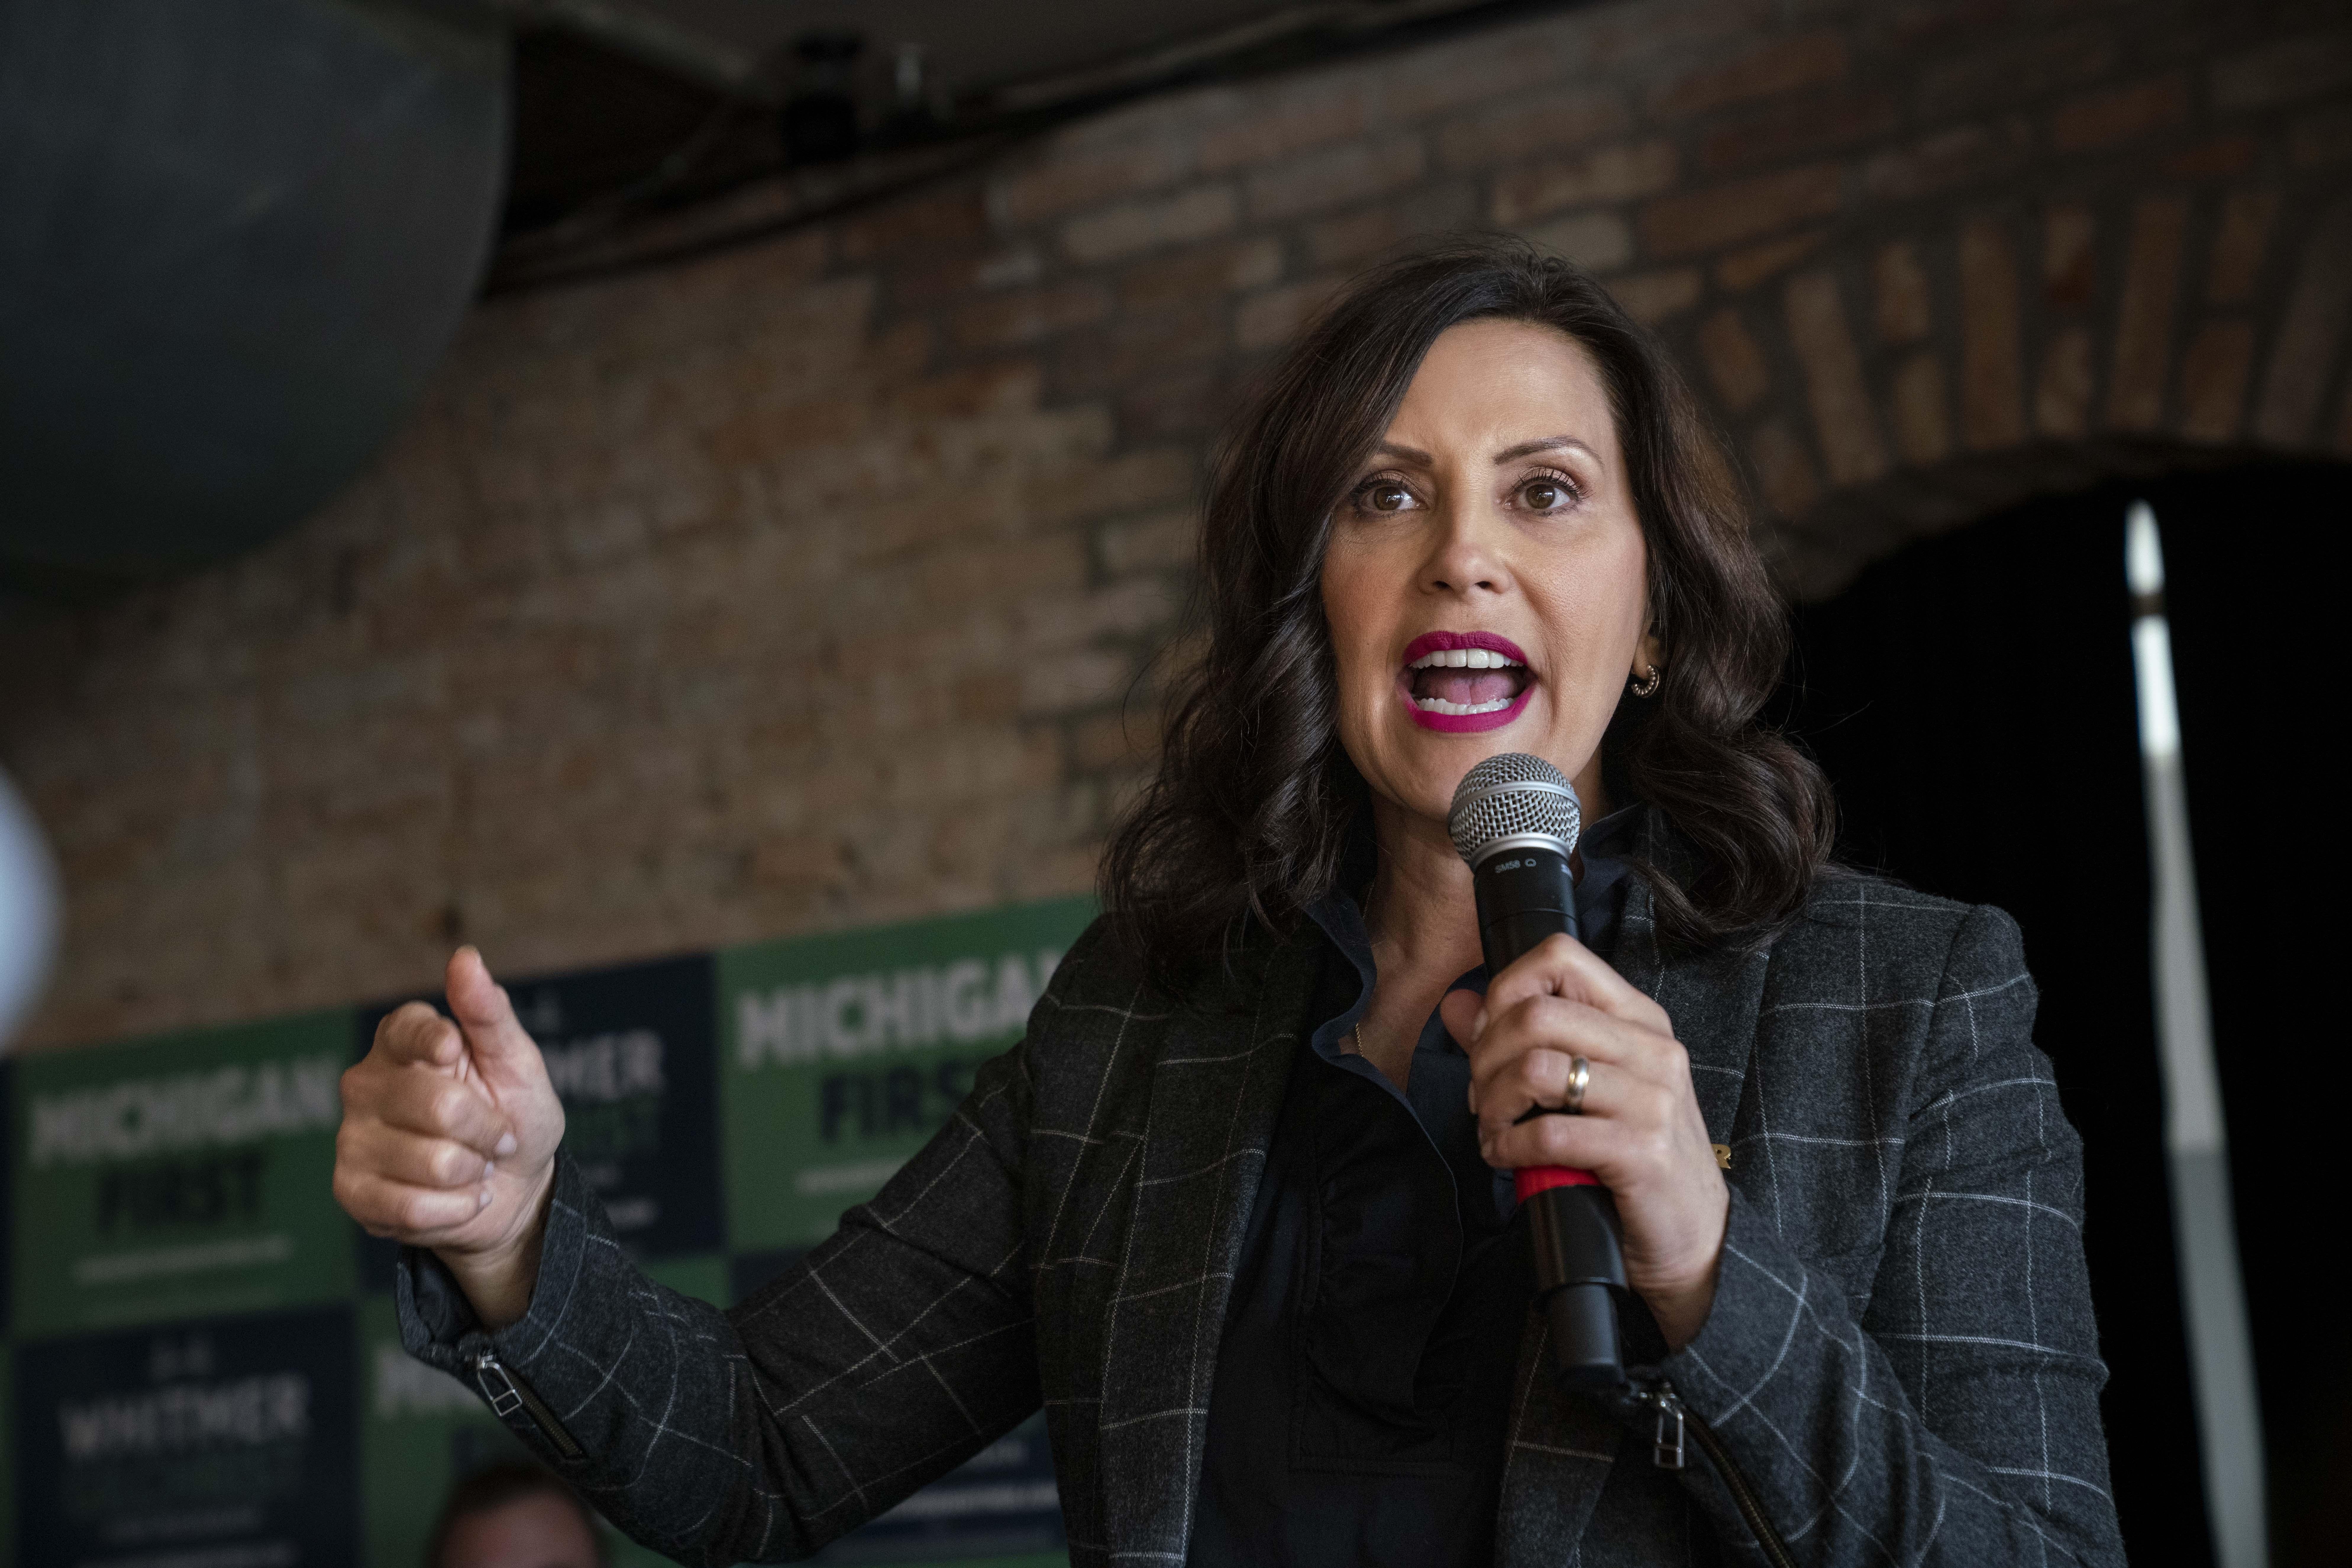 Gretchen Whitmer holding a mic while speaking and gesticulating